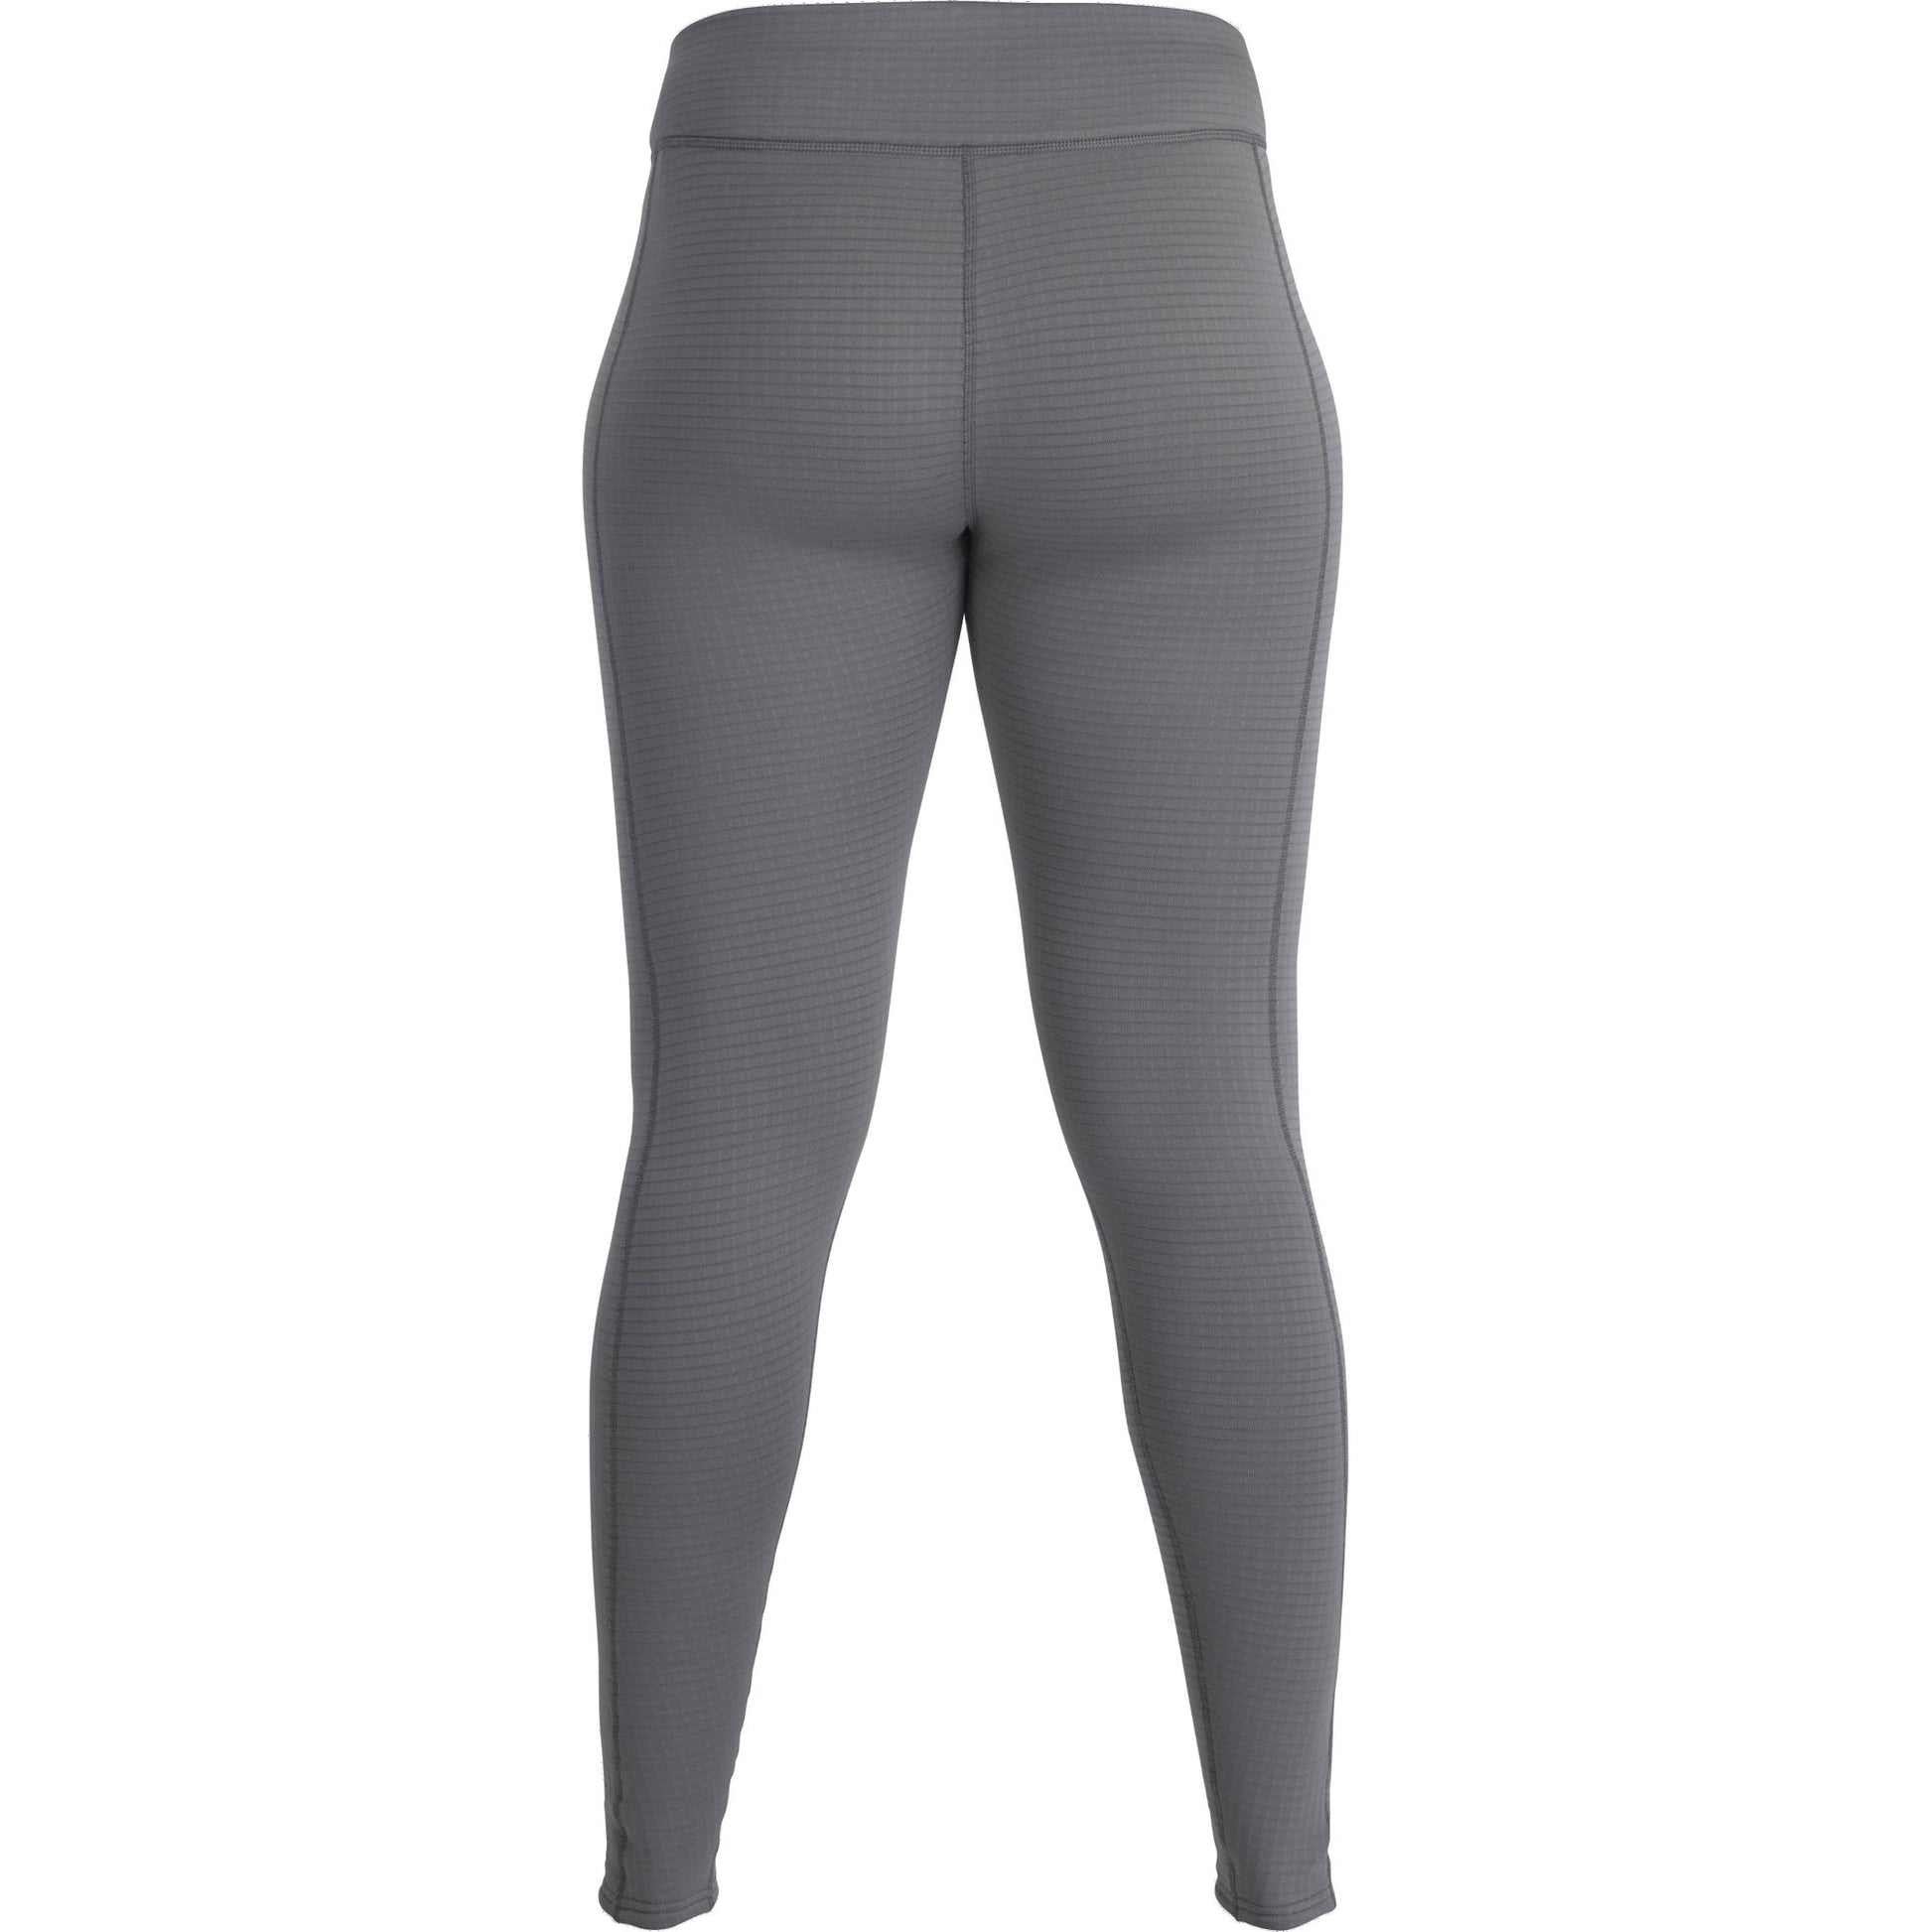 The back view of a woman's grey NRS UPF 50+ sun protection leggings.